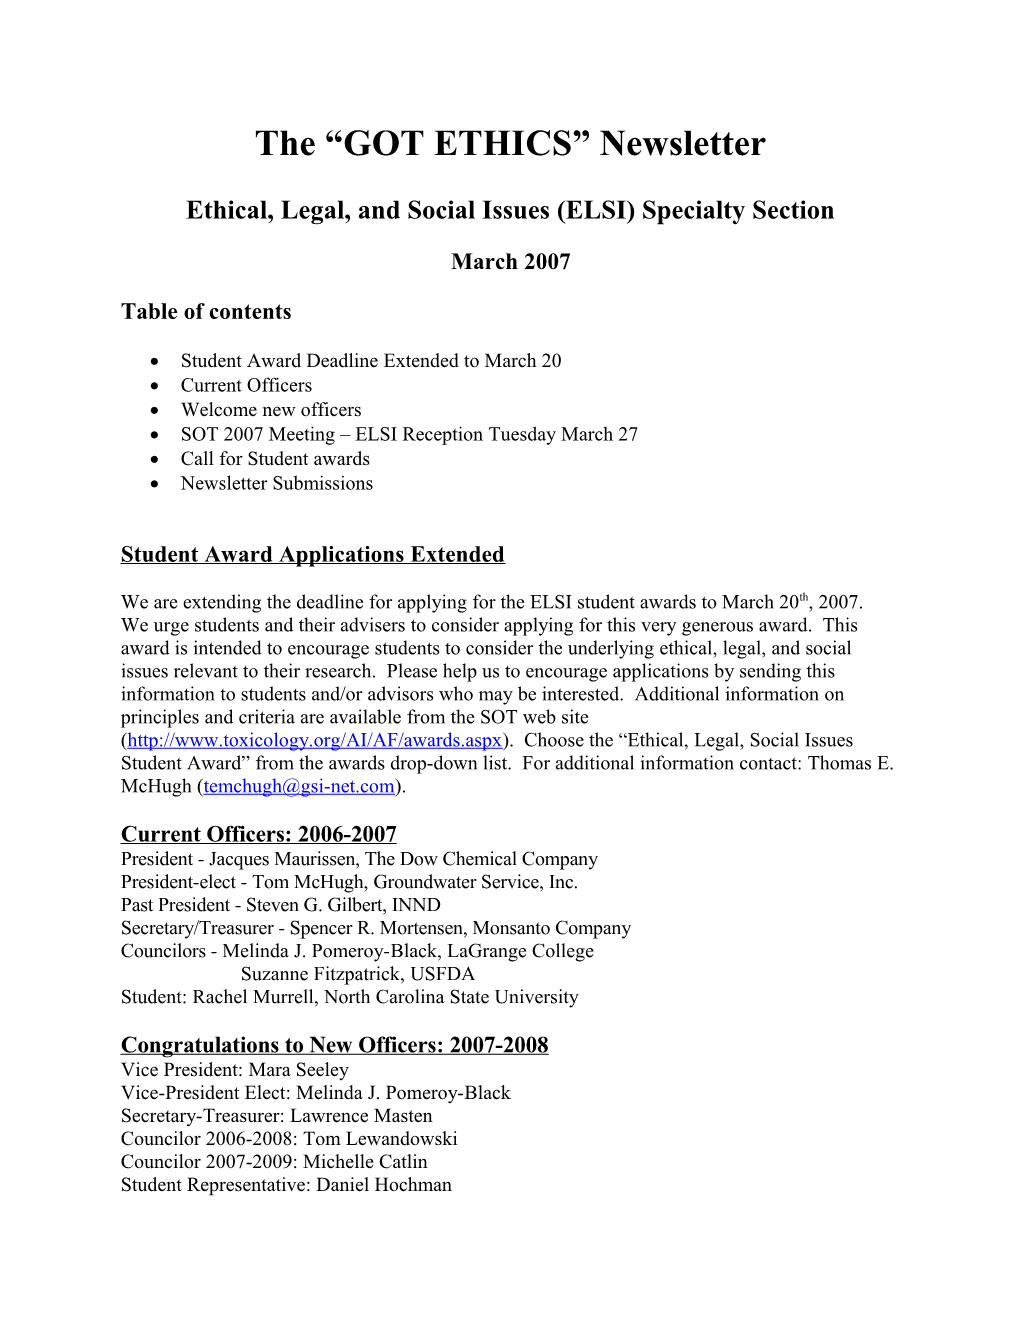 Ethical, Legal, and Social Issues (ELSI) Specialty Section